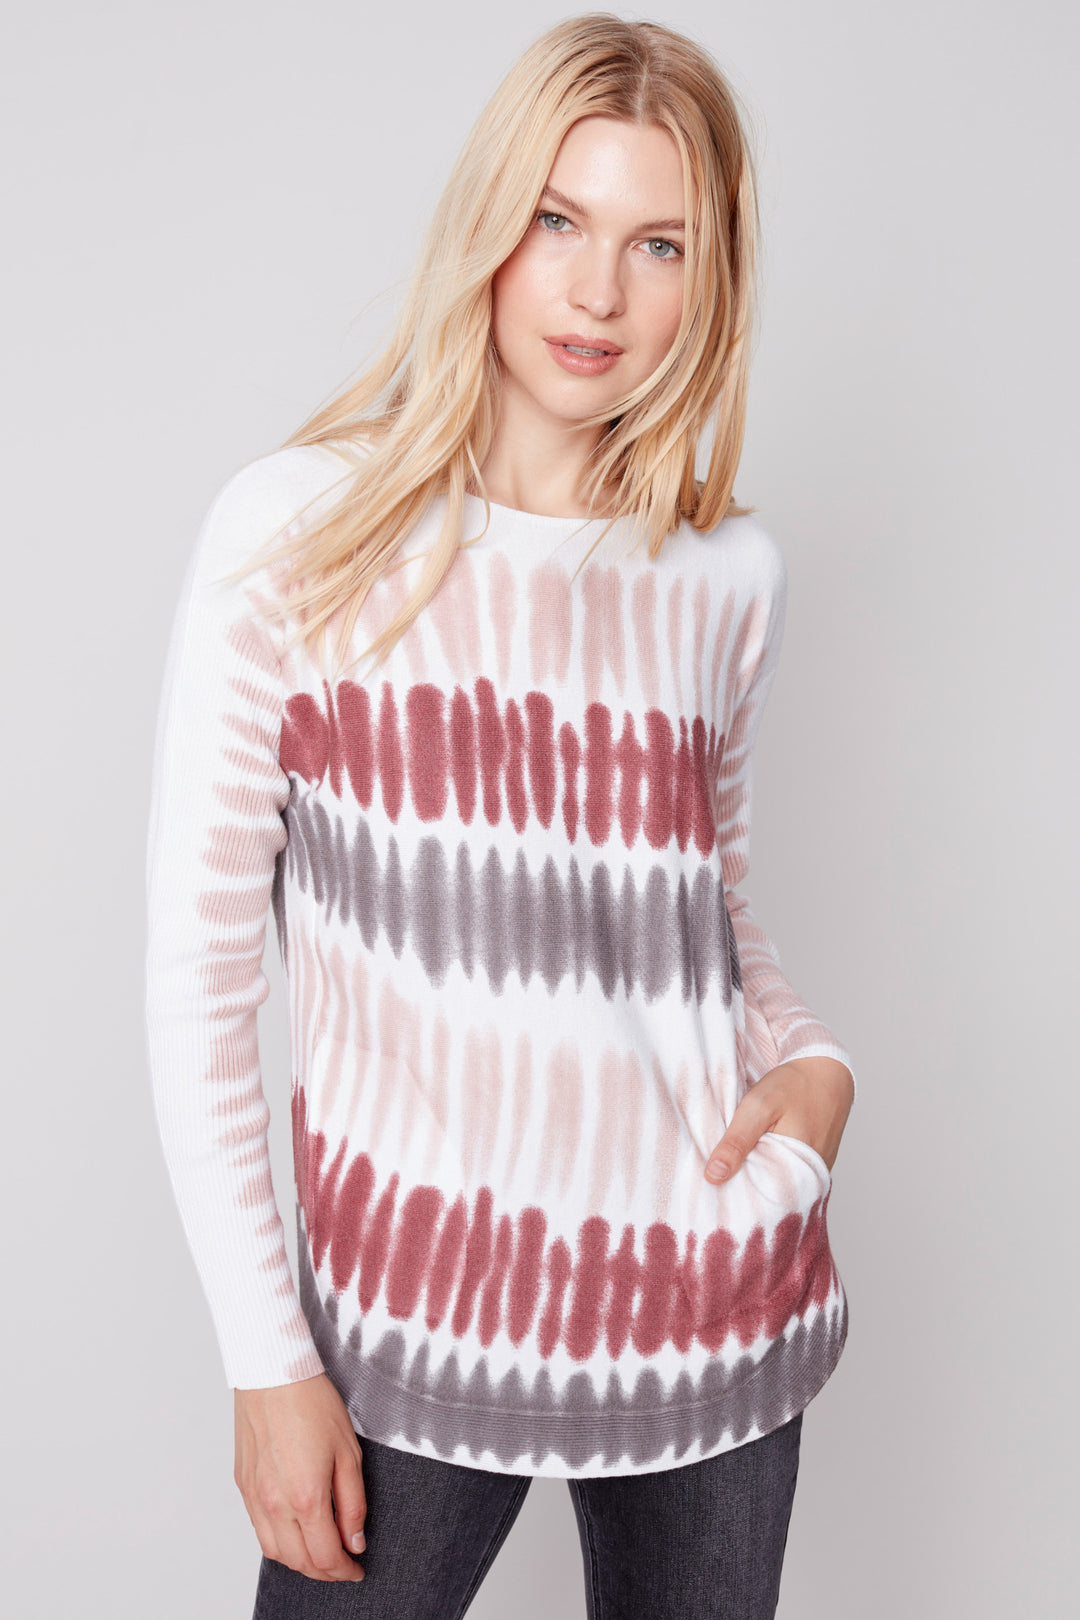 This Paint Stripes Long Sleeve Top is a gorgeous early fall feel sweater. Crafted using plush knit and featuring raspberry tones with pink highlights, this top is elevated with a lace-up cuff detail and pockets. Enjoy the comfort of a rounded hem and soft natural style with this statement piece.